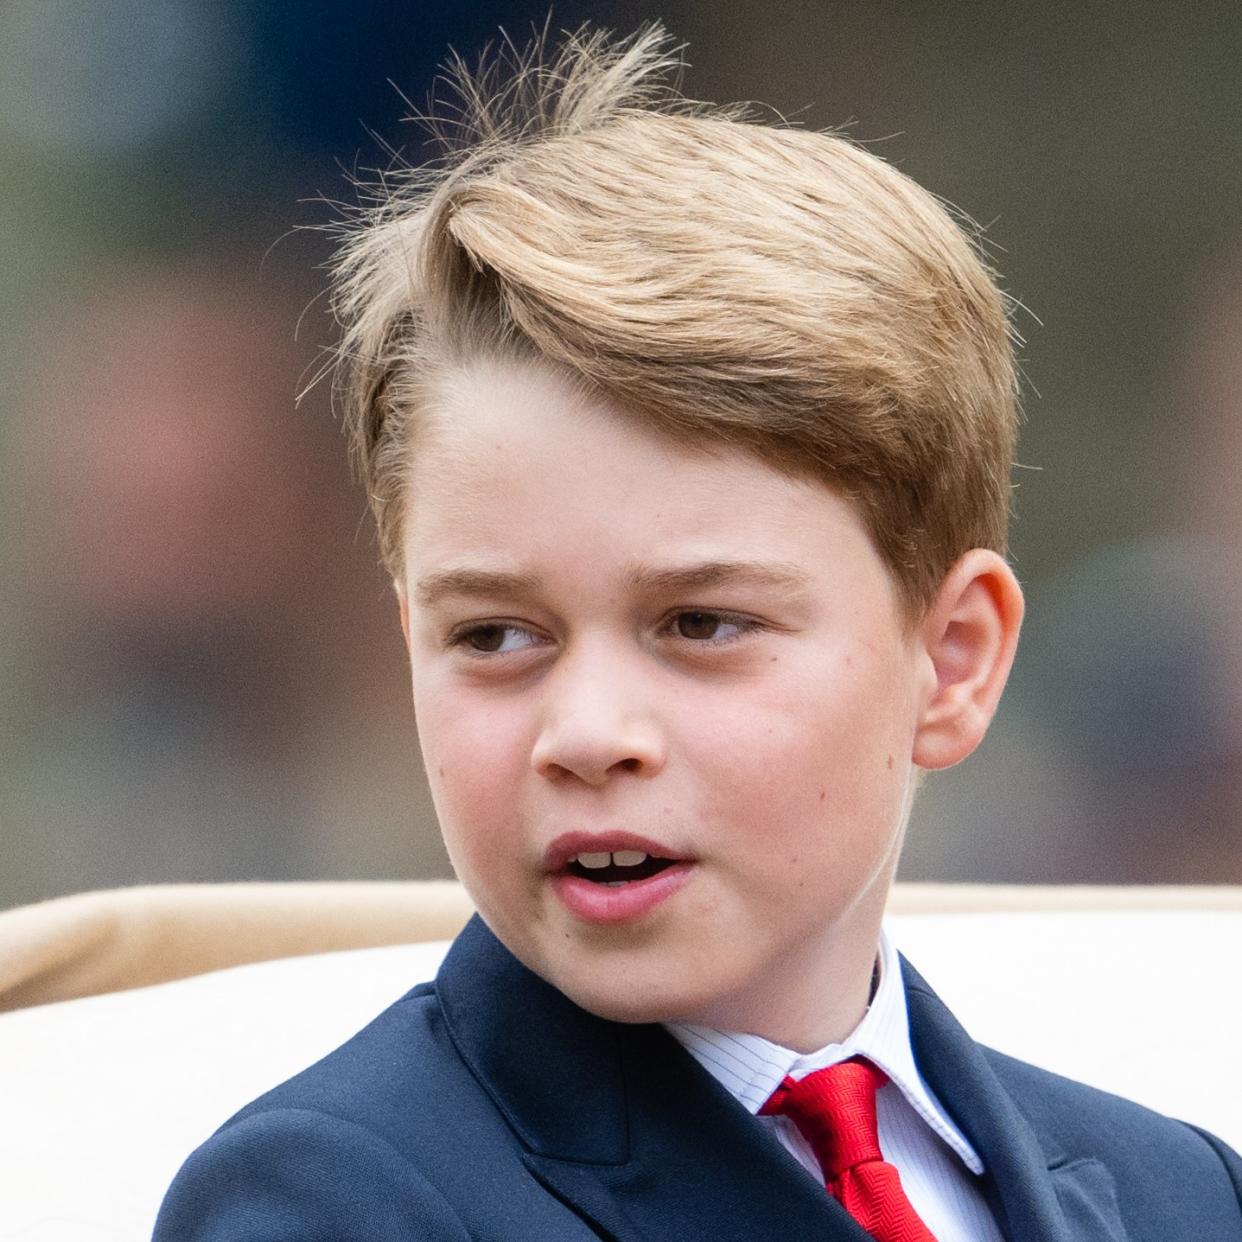  Prince George riding in the carriage at Trooping the Colour 